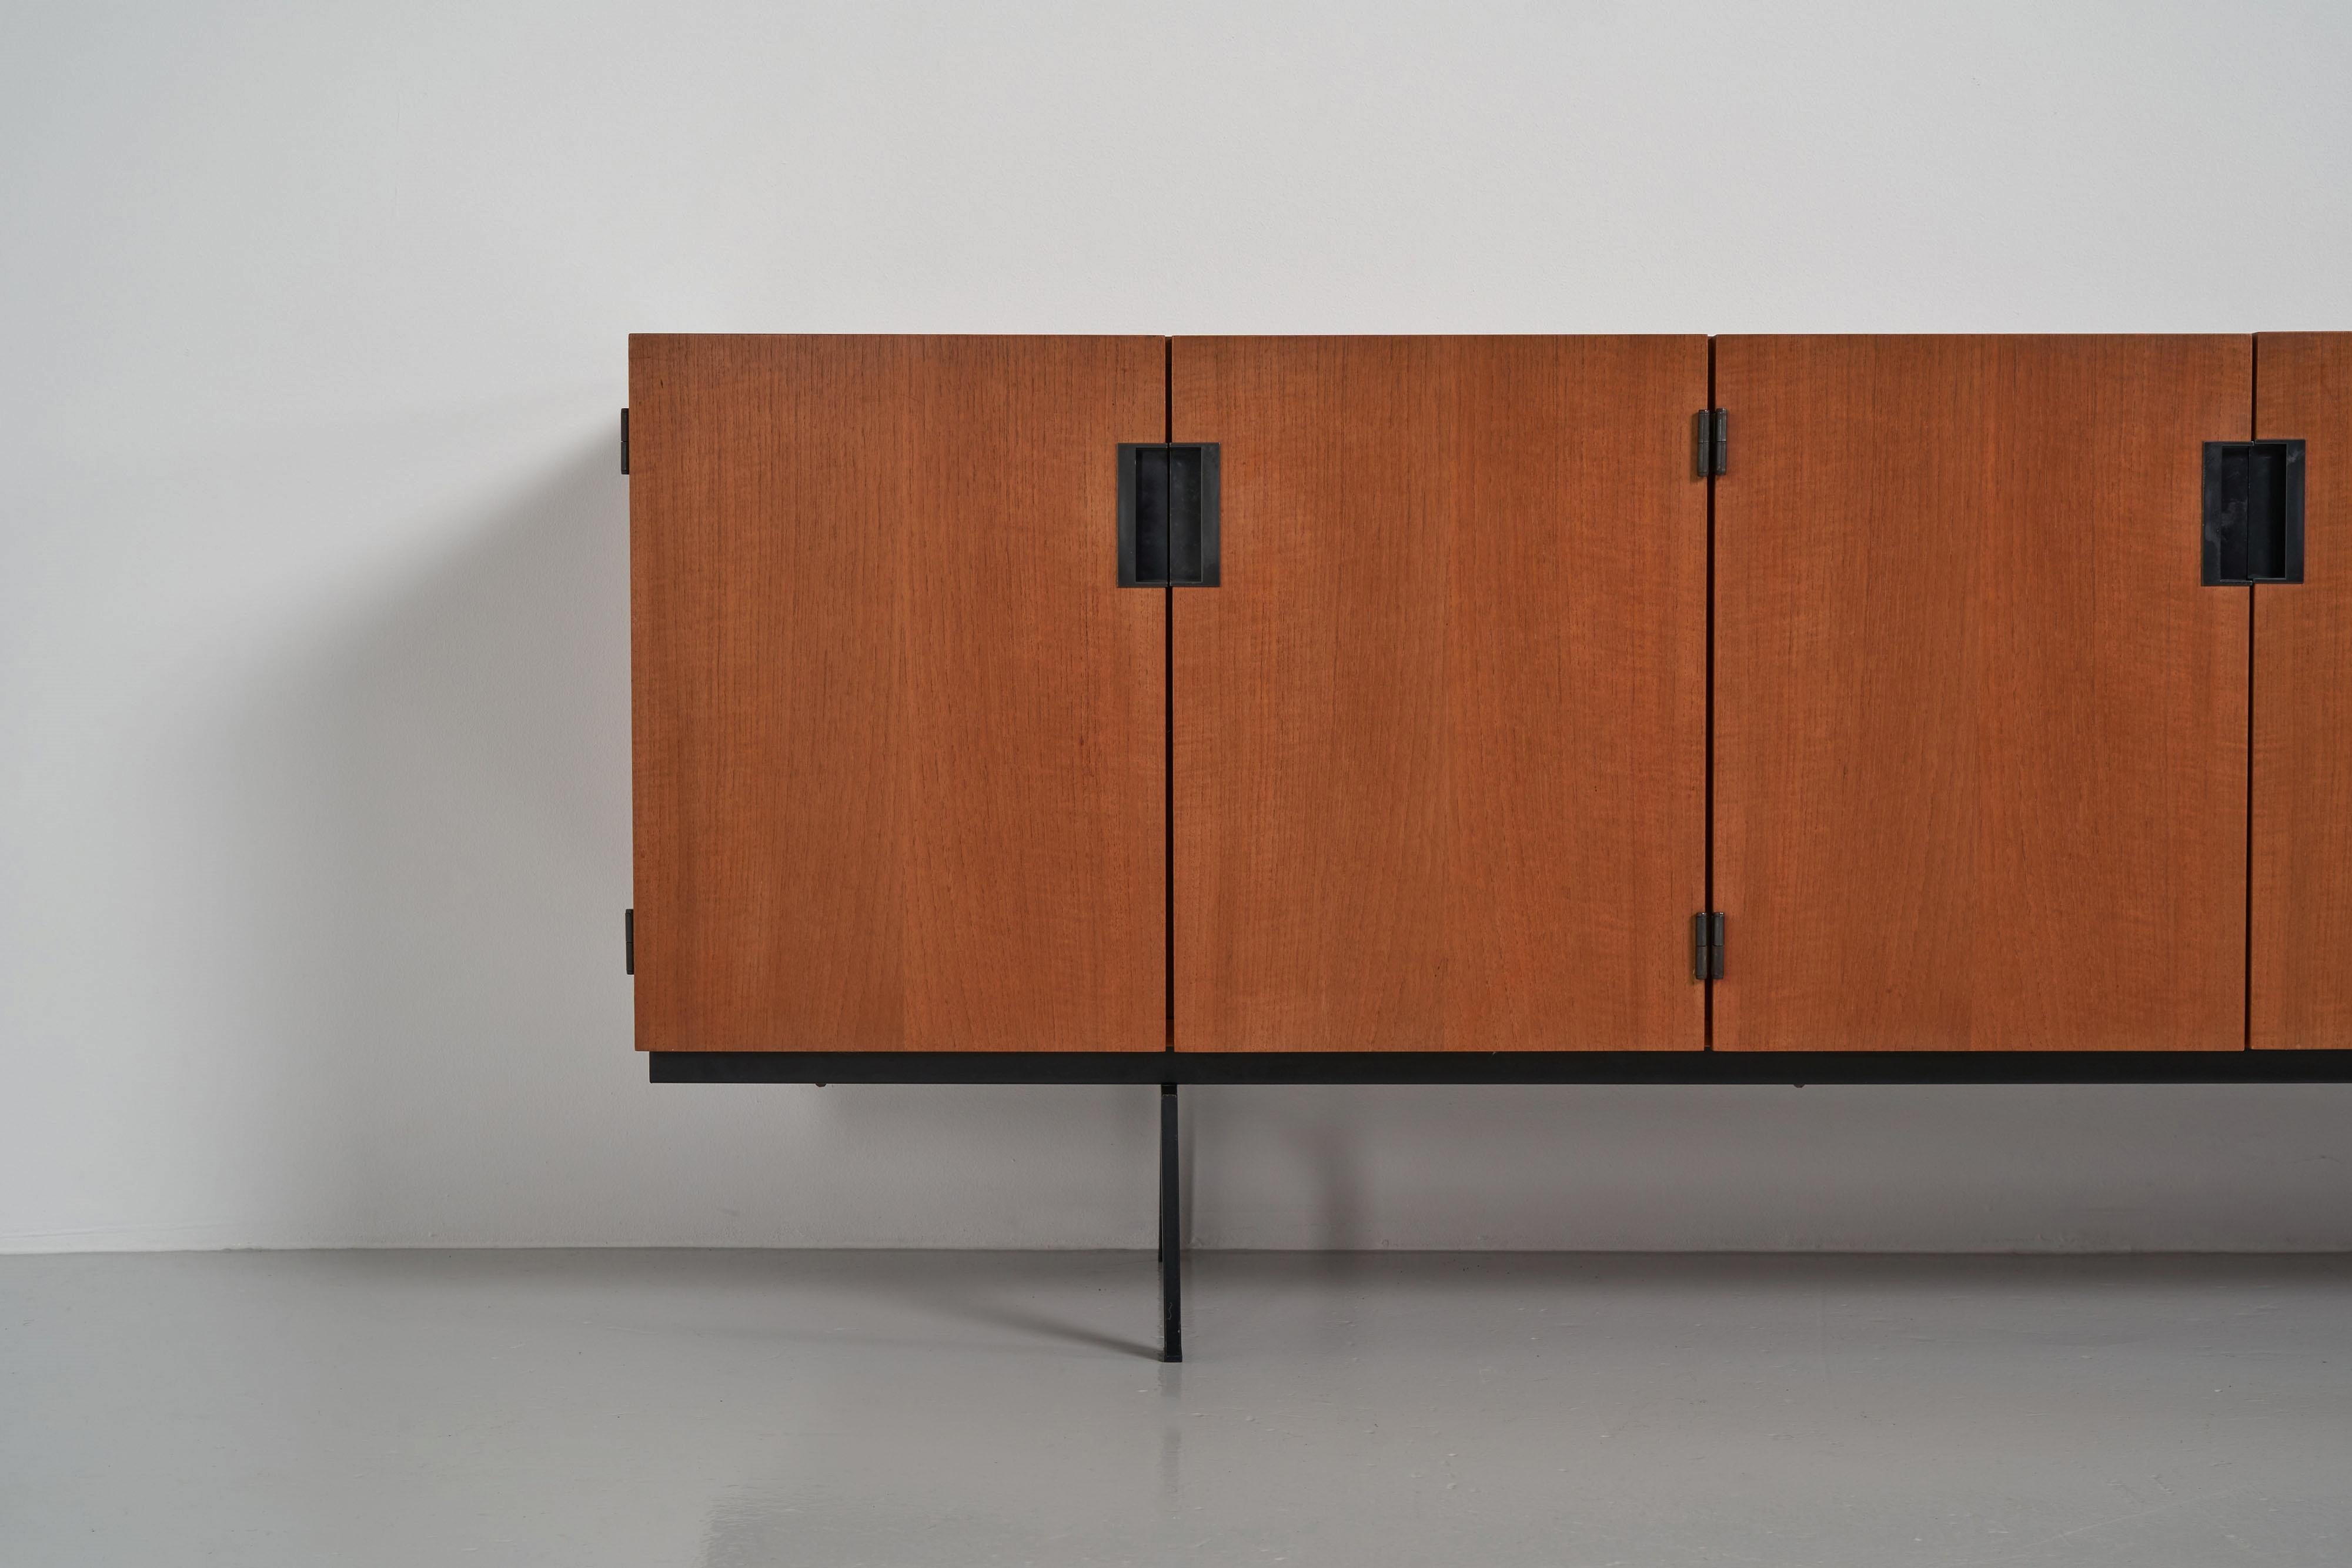 This is for an iconic and nice minimalist sideboard model number DU03, designed by Cees Braakman and manufactured by Pastoe UMS, Holland 1958. This minimalistic designed sideboard has beautiful, sophisticated detailed features. The handles are made